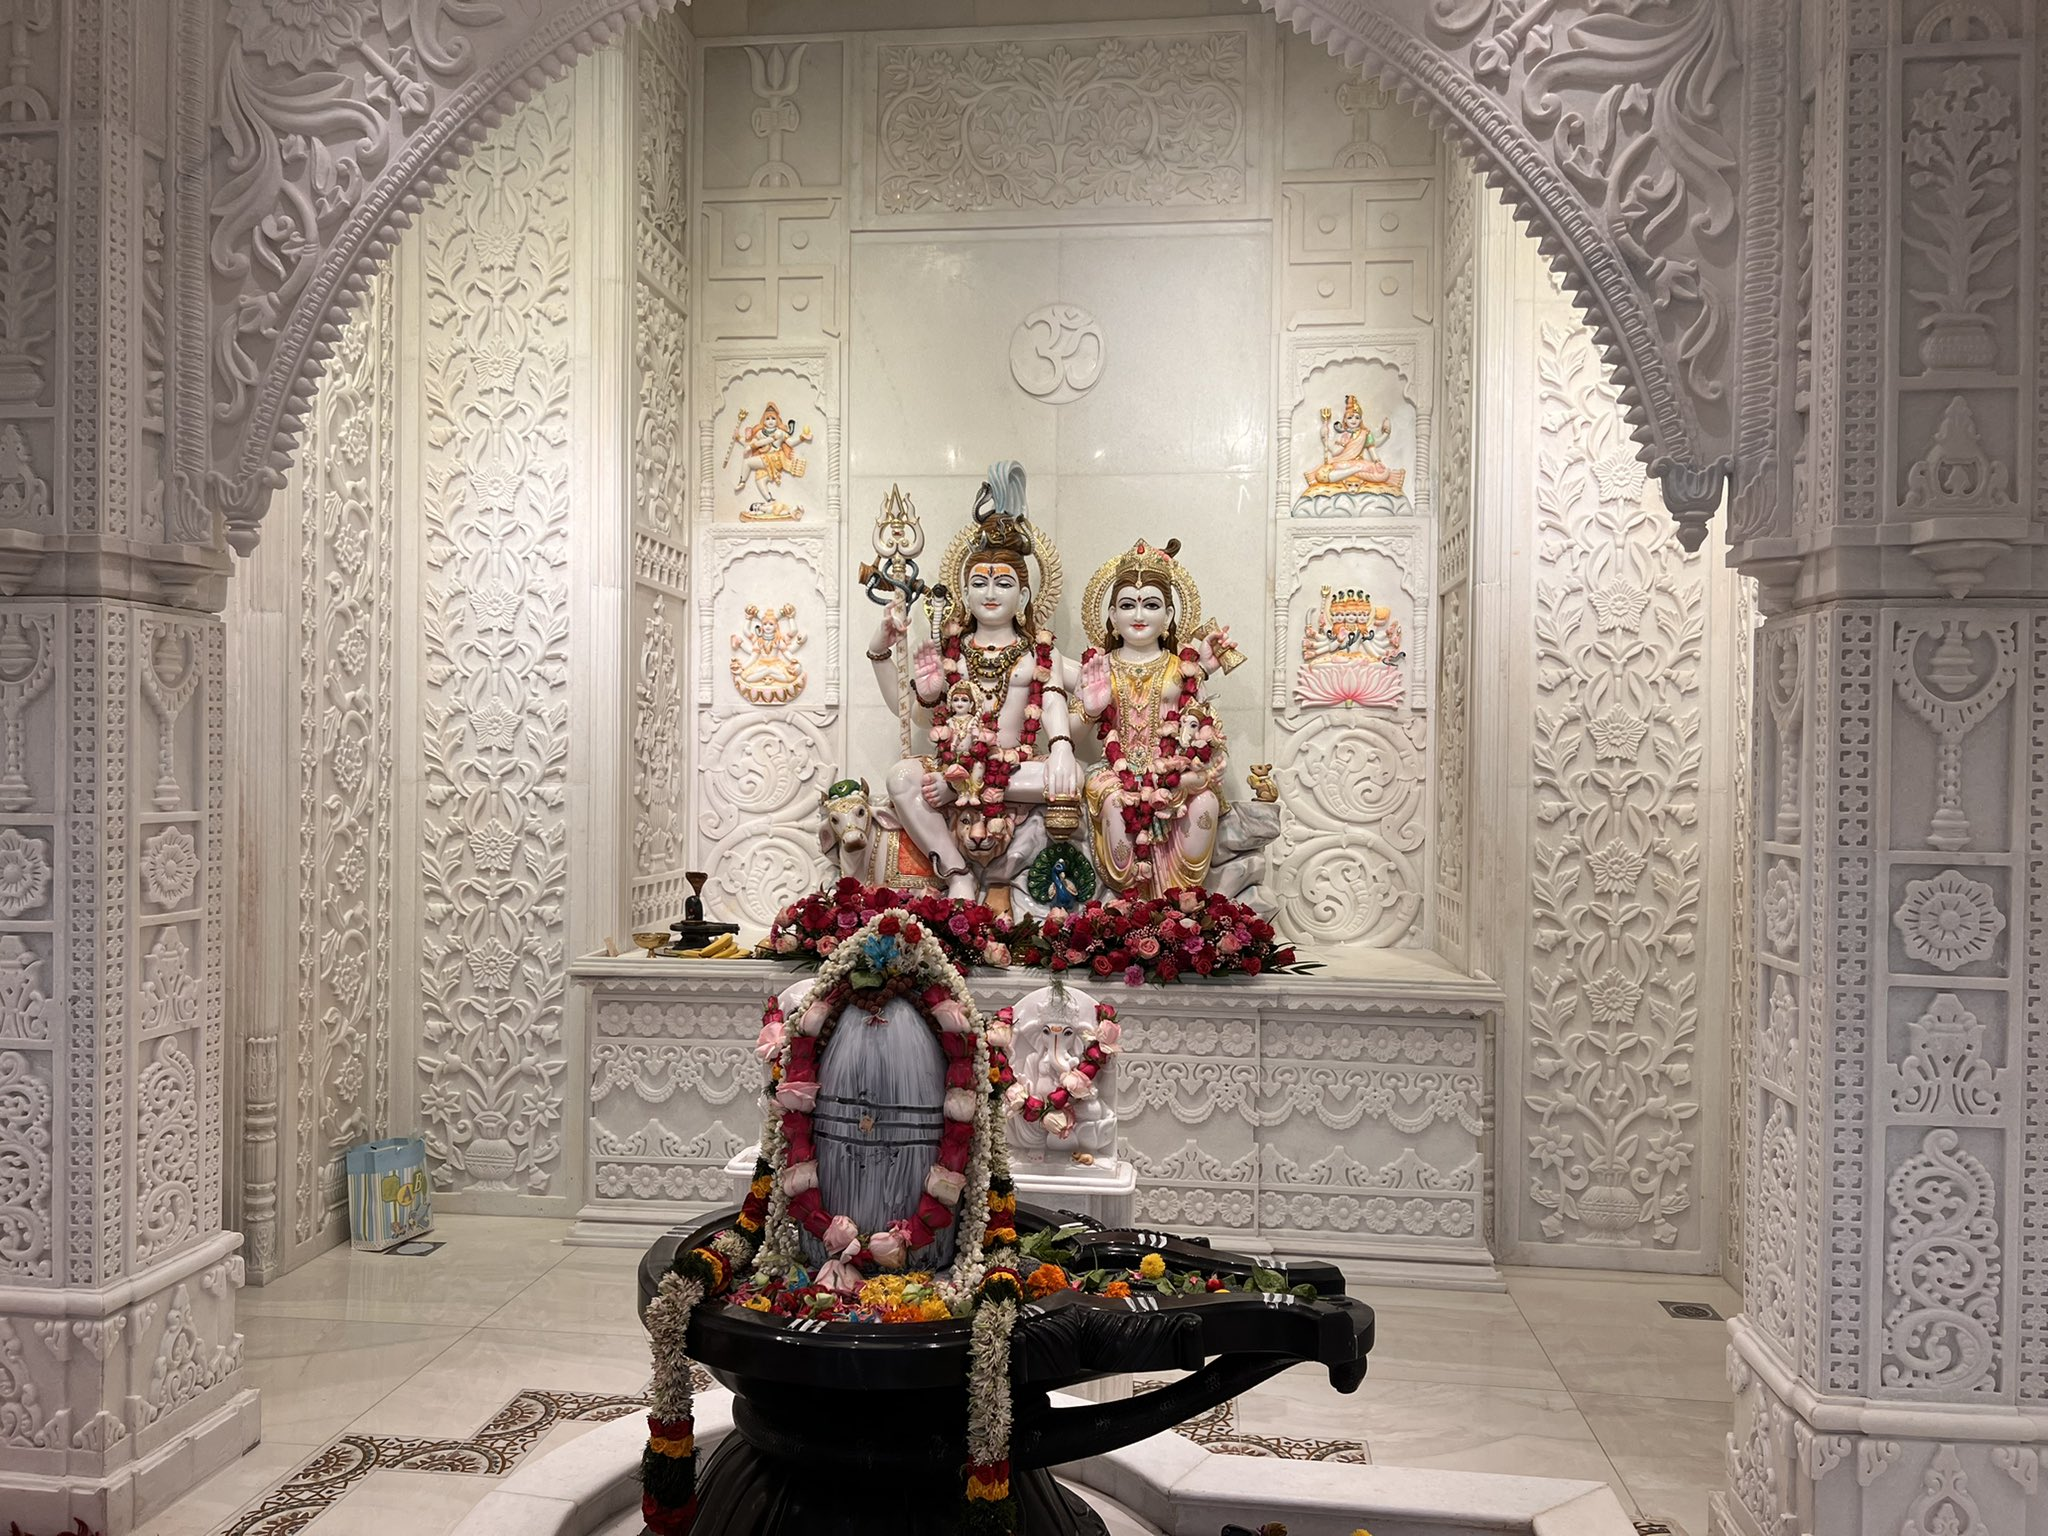 Dubai Hindu temple officially opens to residents